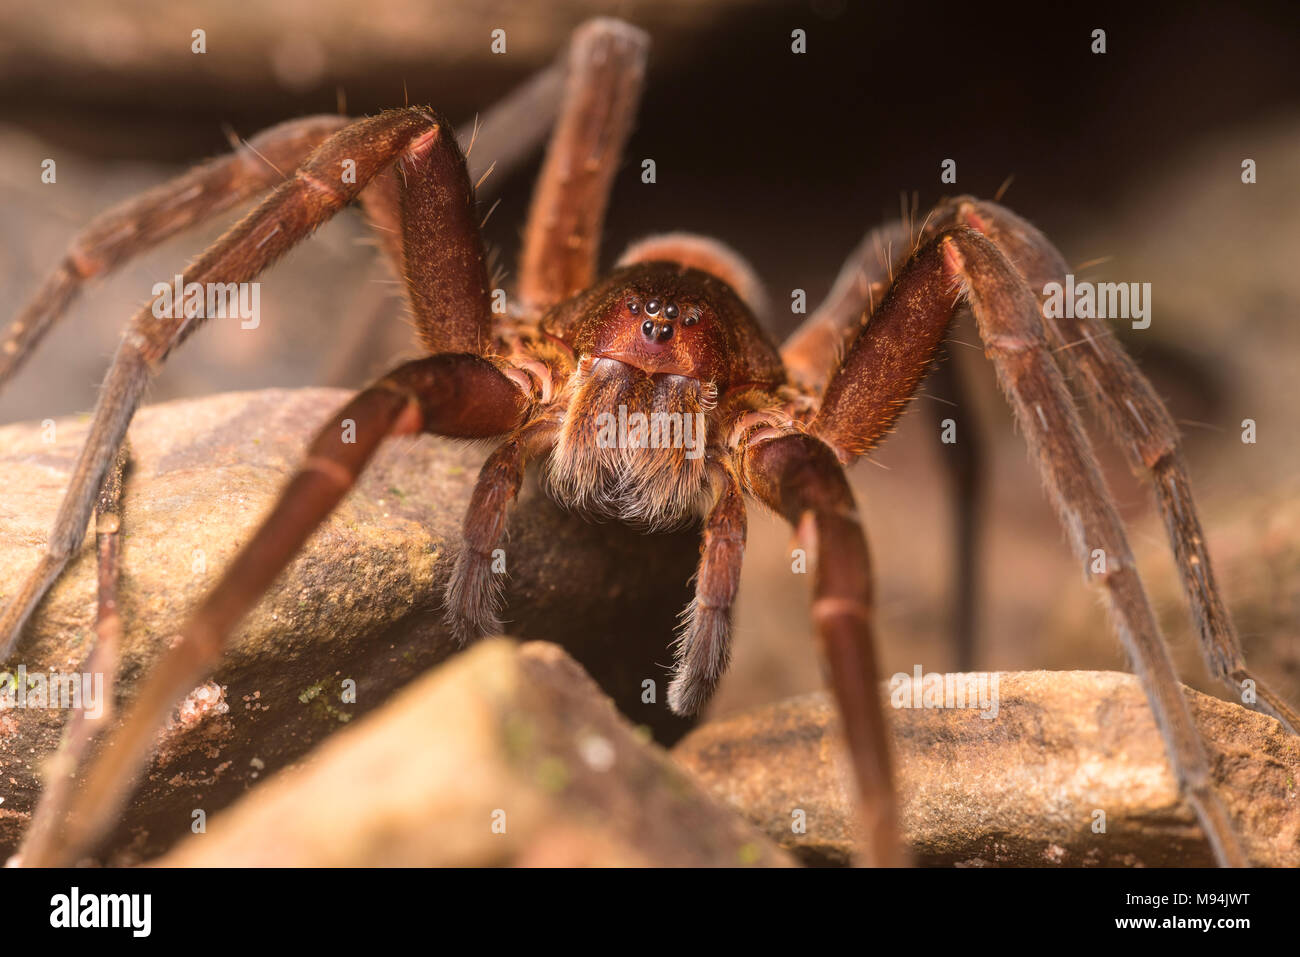 A close up of a male Ancylometes spider, these large spiders are found near water and can take large prey. Stock Photo